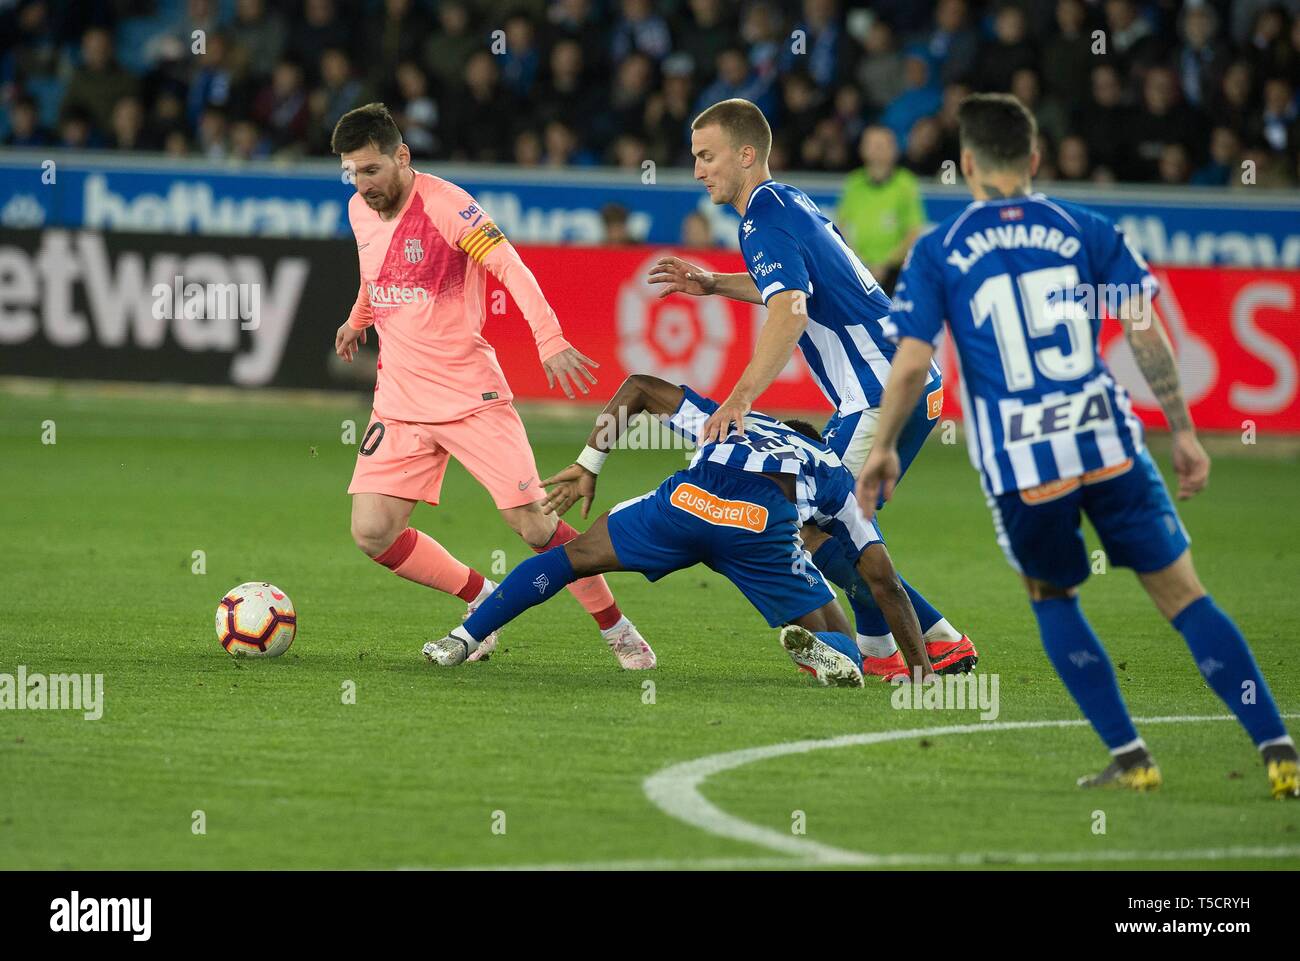 Rust uit Gewoon Fabel D.Alaves v Barcelona La Liga, Spain, april 24th 2019 Ely of D. Alaves and  Messi of Barcelona in action during the Santander League (La Liga) match  played in Mendizorroza Stadium between D.Alaves